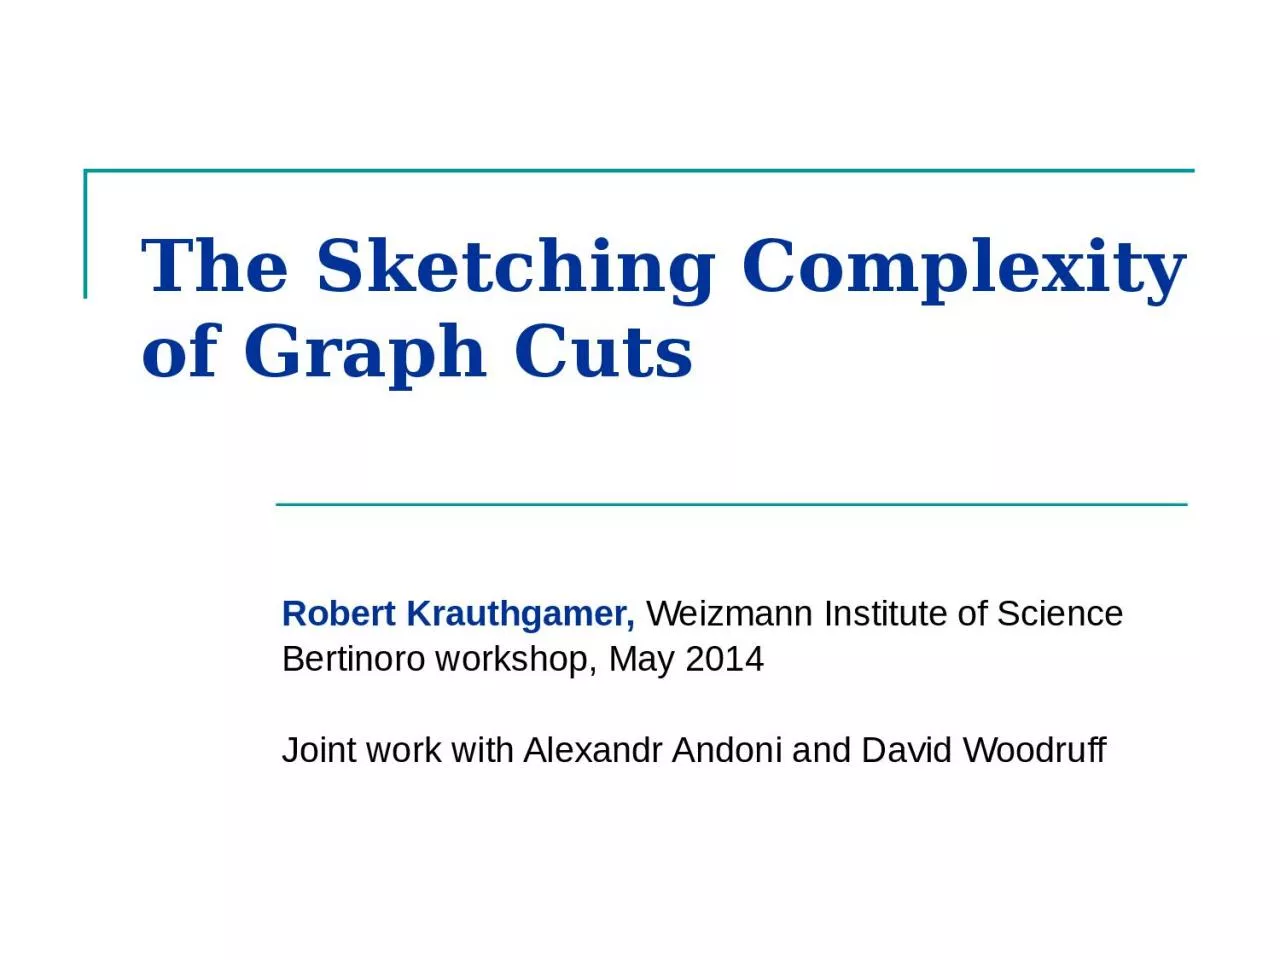 The Sketching Complexity of Graph Cuts